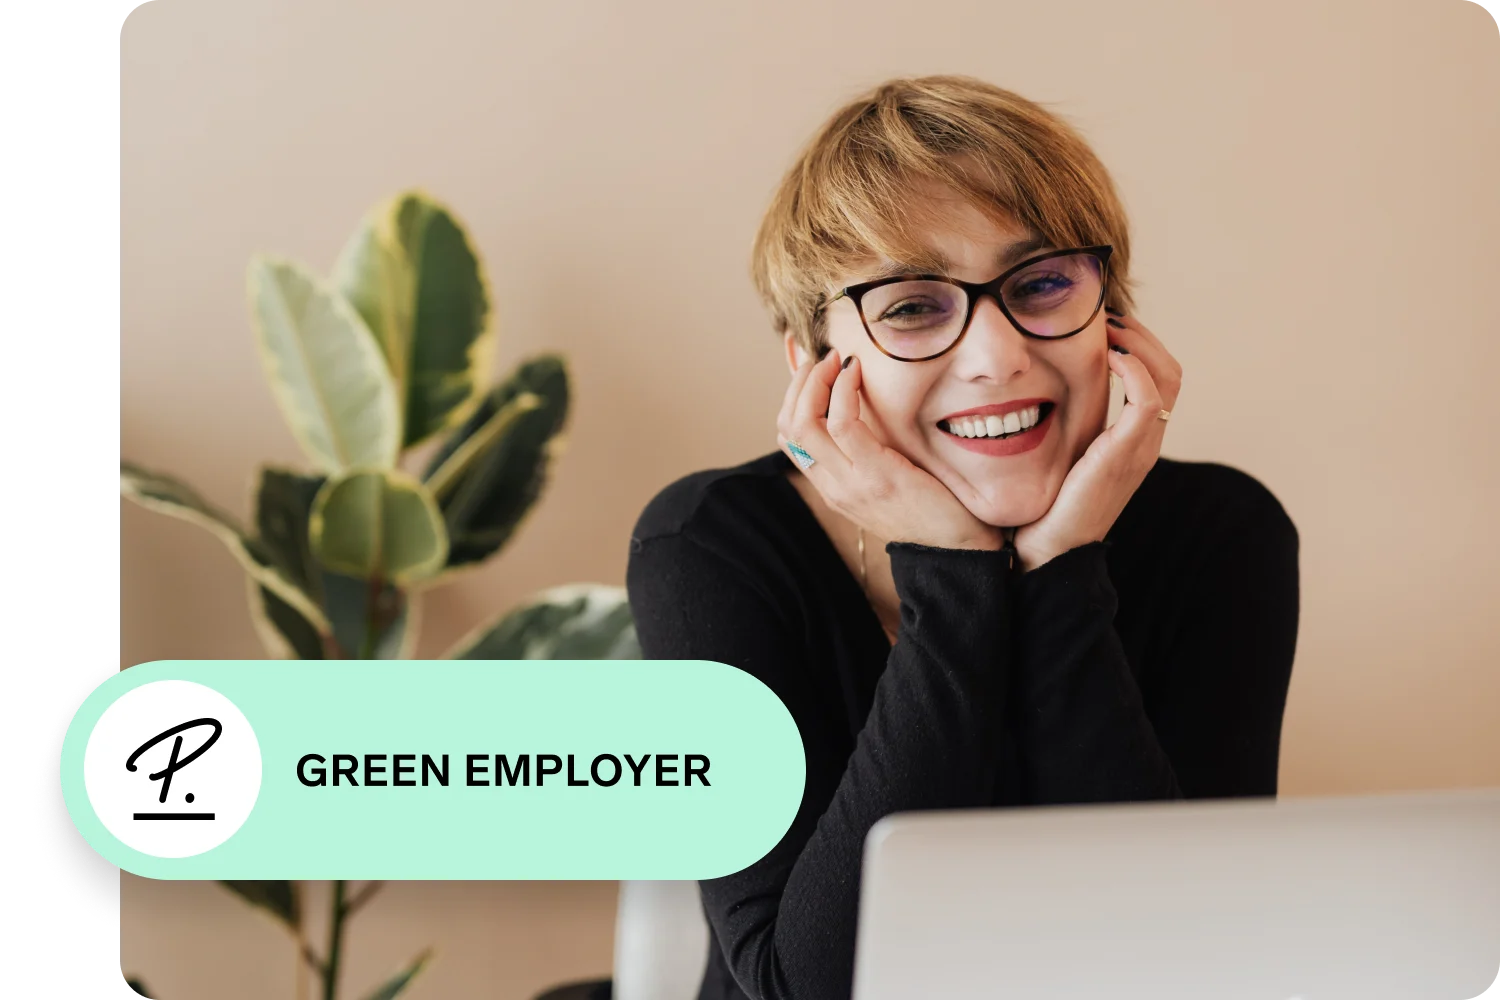 Smiling Worker + Personio Green Employer Badge